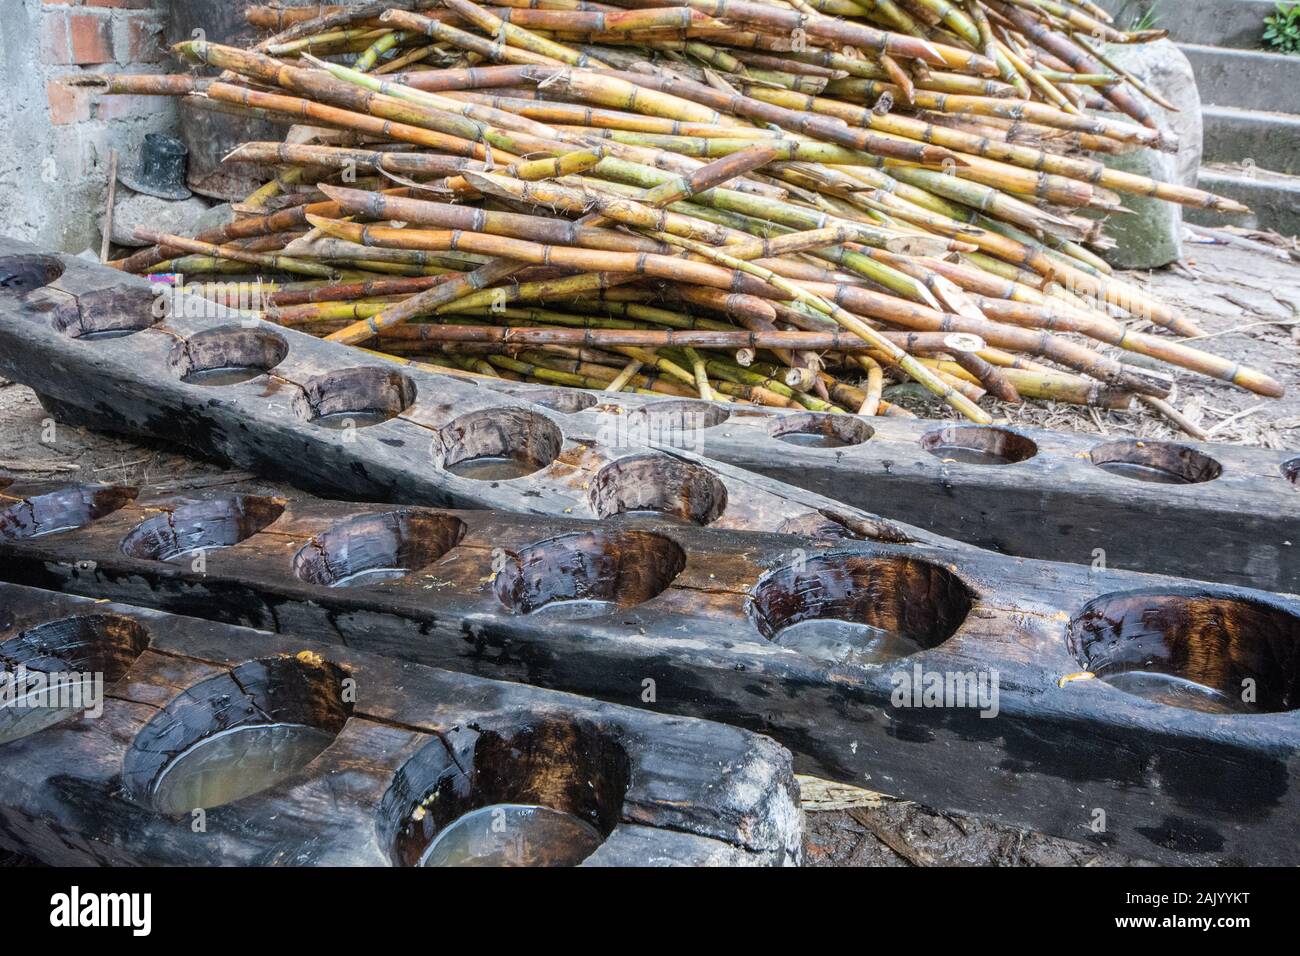 Wooden moulds and sugar cane for processing sugar into blocks in a traditional way in Amazonas in northern Peru Stock Photo